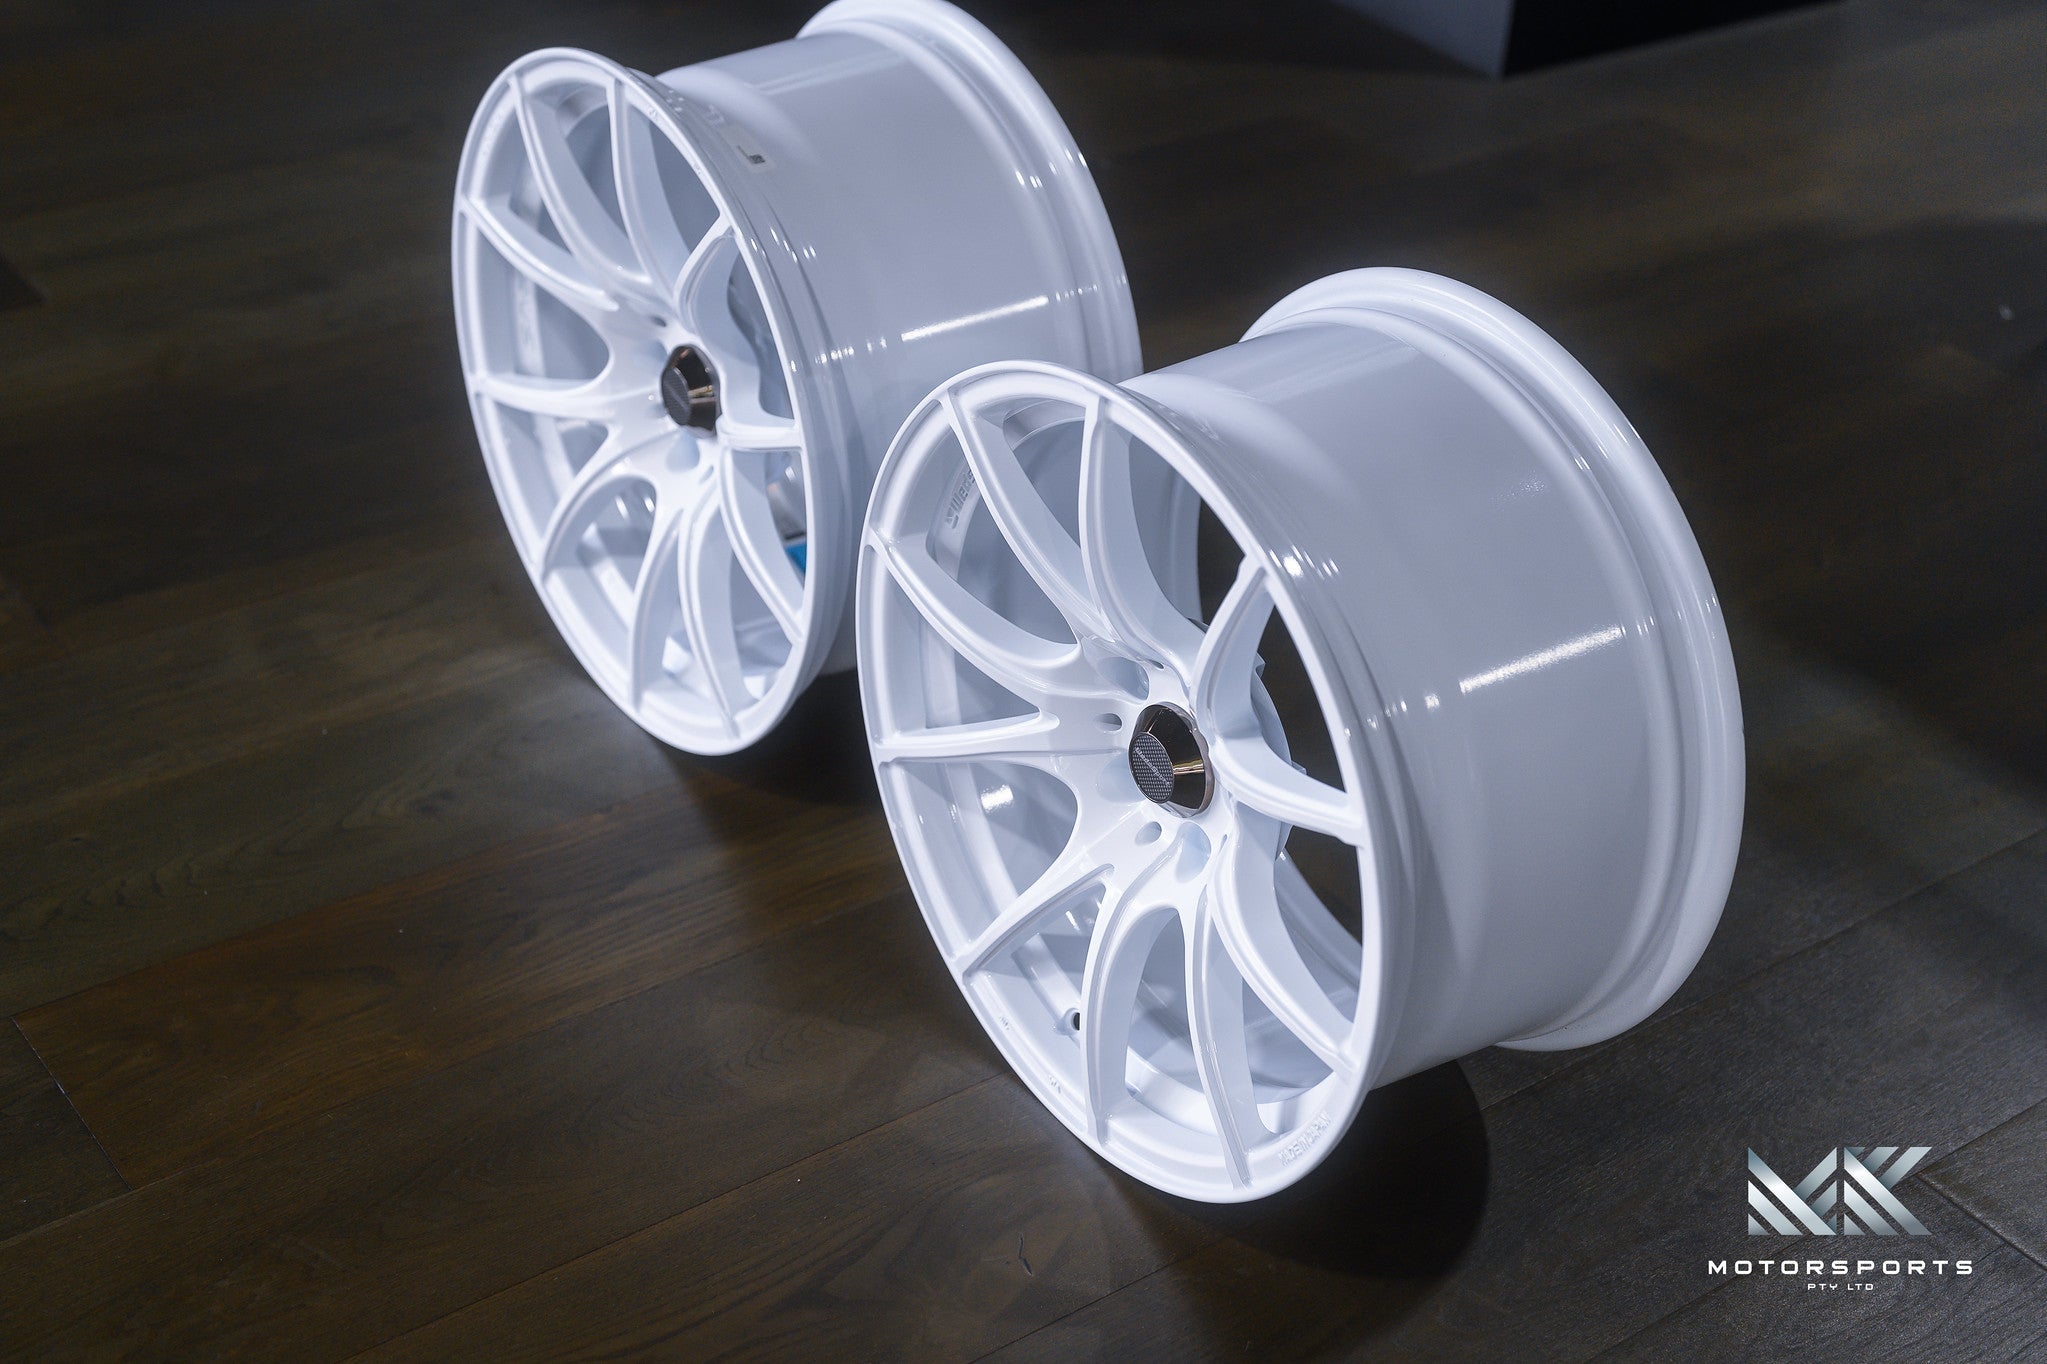 WedsSport SA-10R - Premium Wheels from WedsSport - From just $1999.00! Shop now at MK MOTORSPORTS